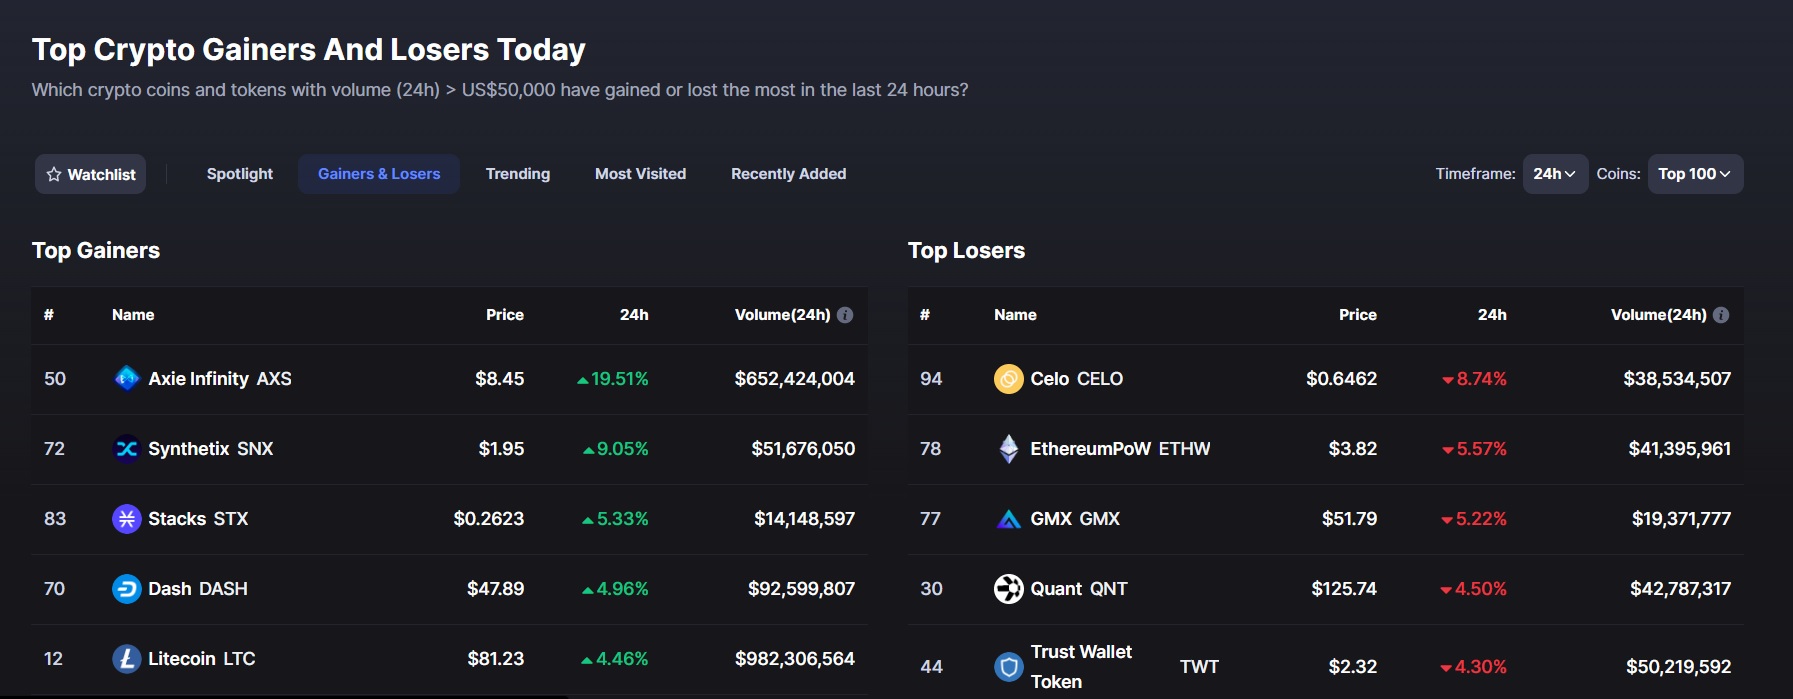 Quick view of the top gainers and losers on CoinMarketCap